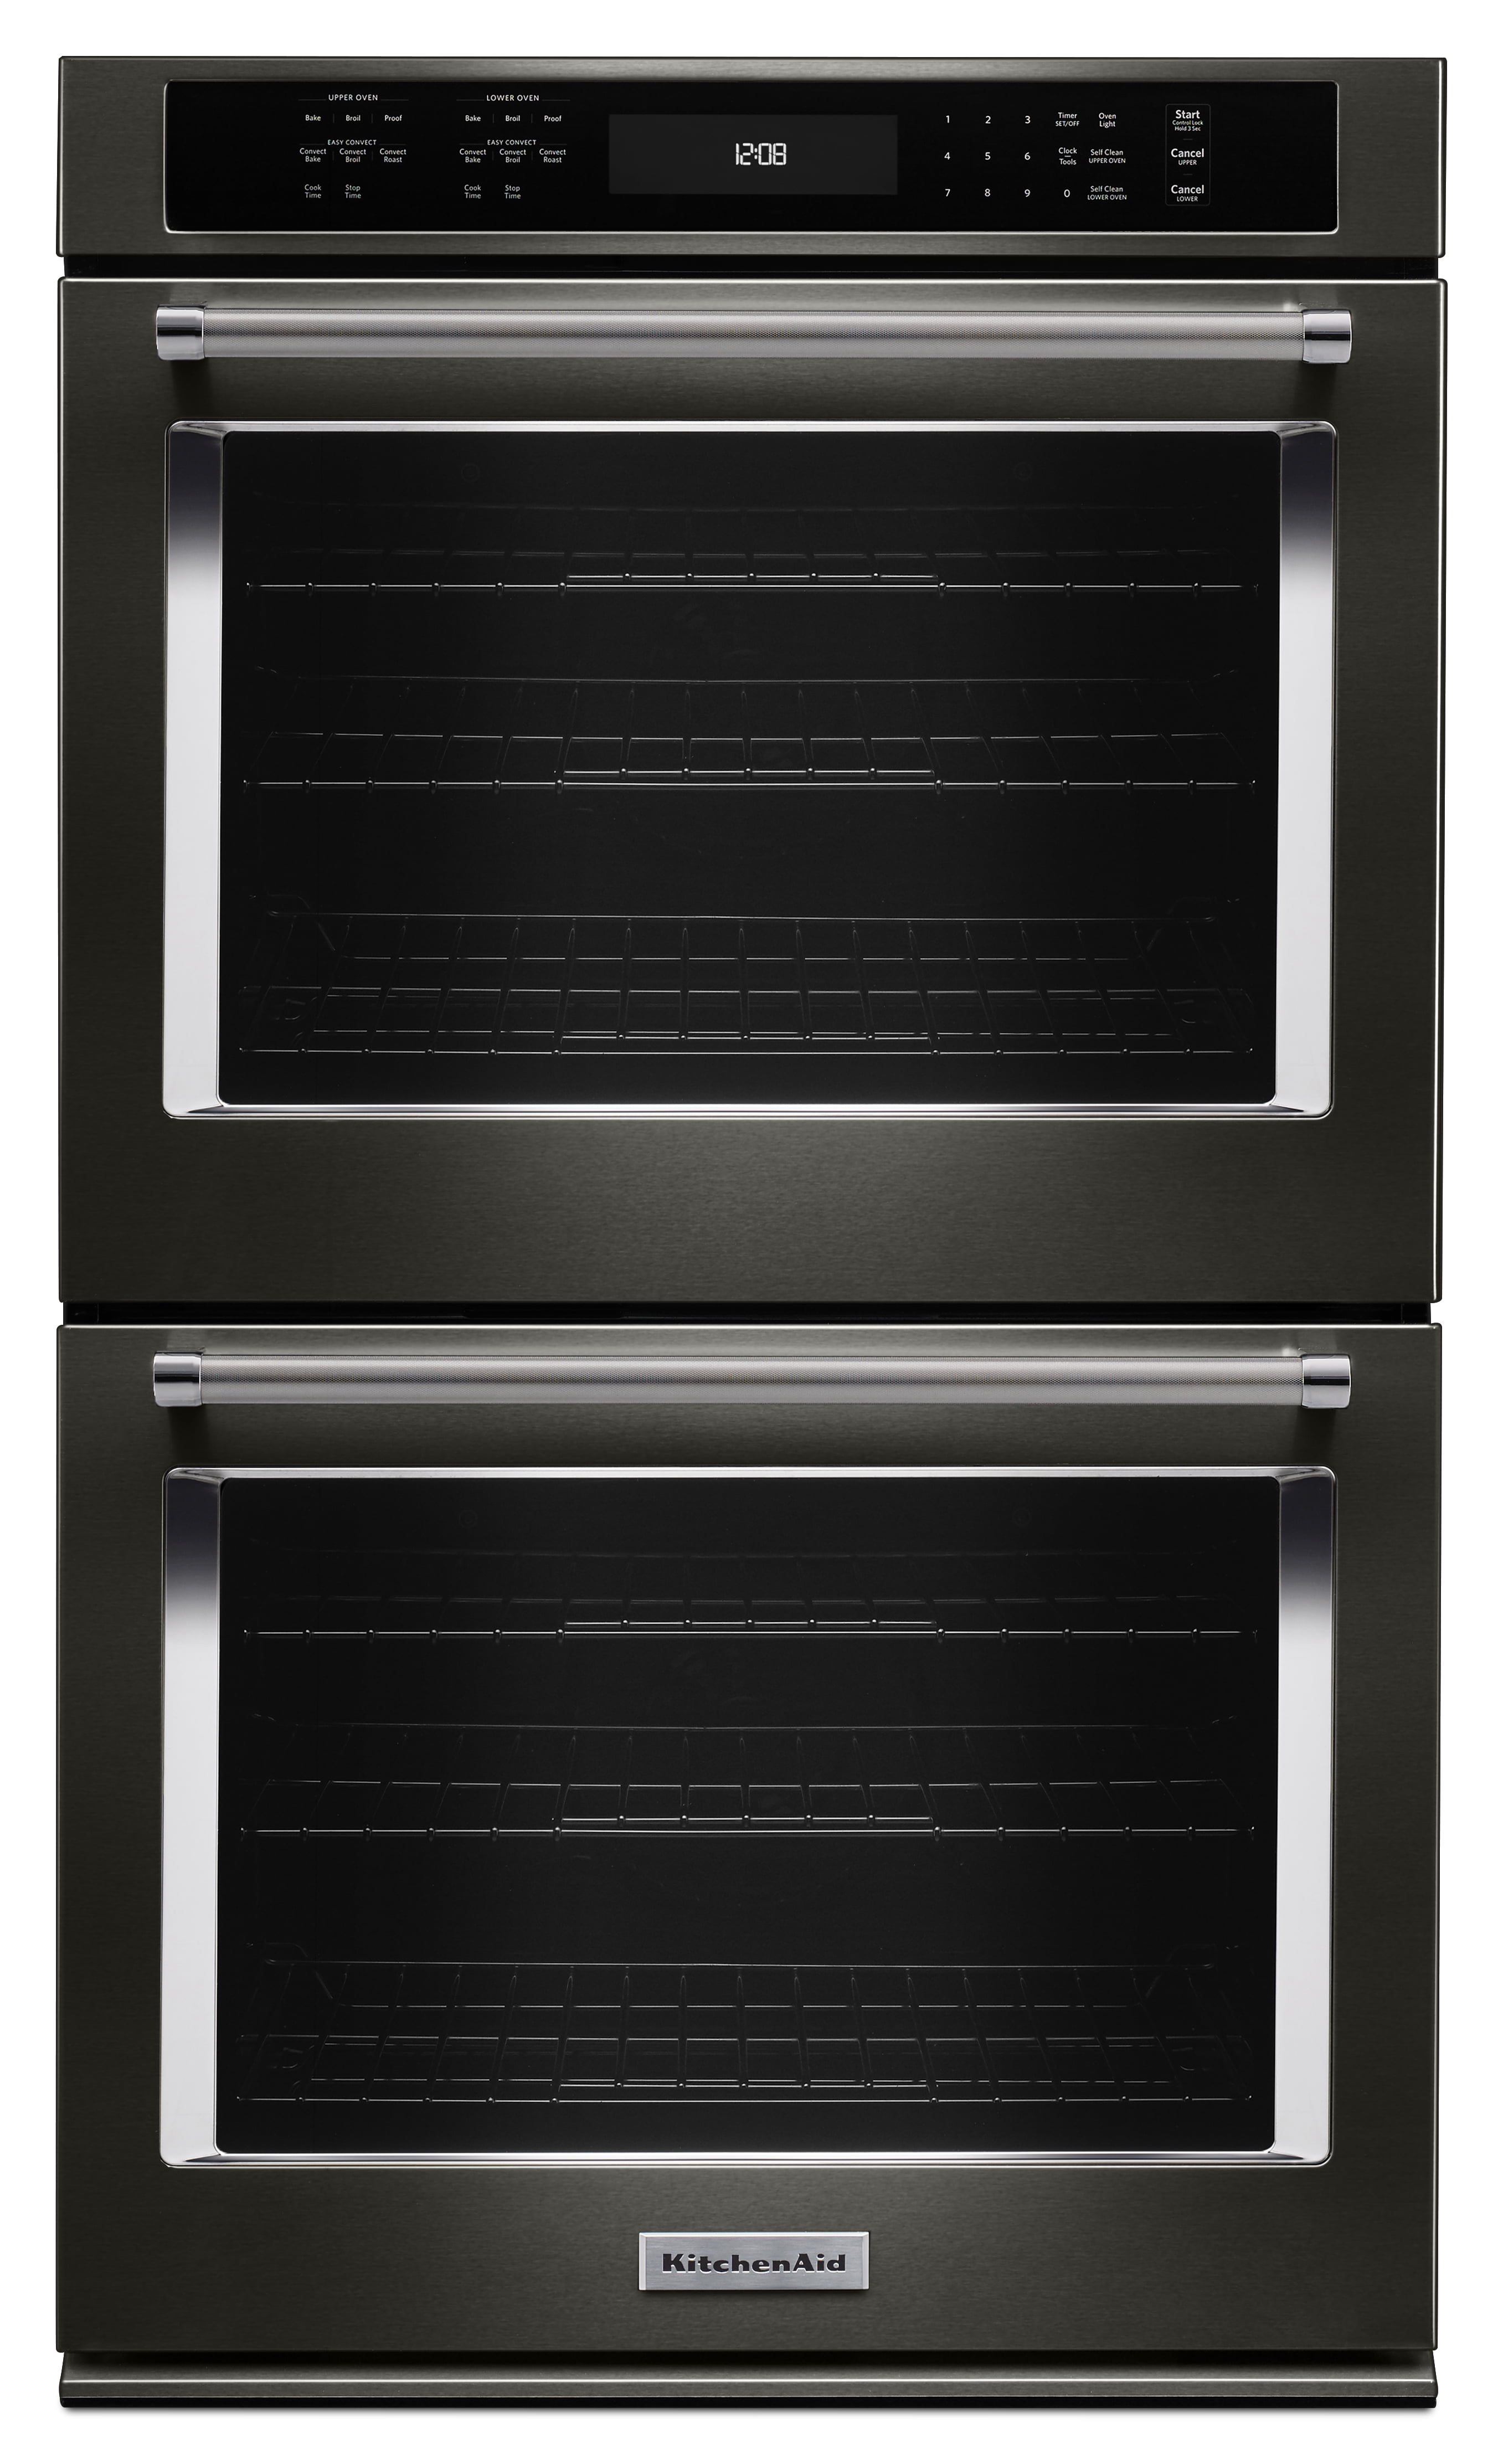 kitchenaid double oven wall ovens stainless steel appliances convection electric cu ft built appliancemart furniture introduces line walmart